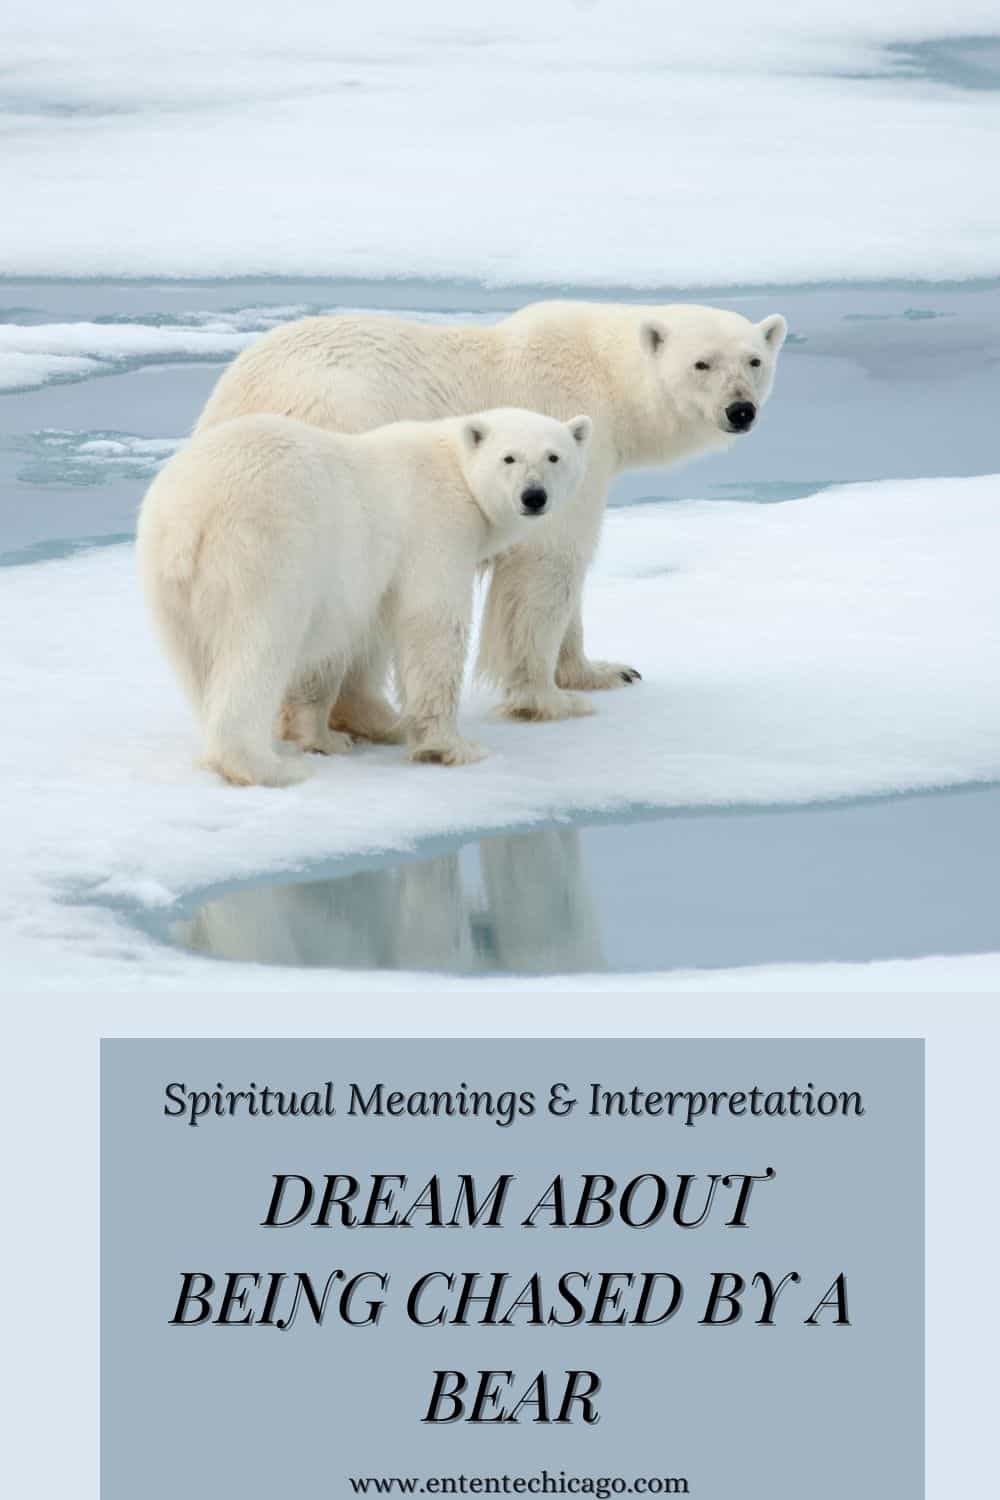 Dream About Being Chased By A Bear (Spiritual Meanings & Interpretation)